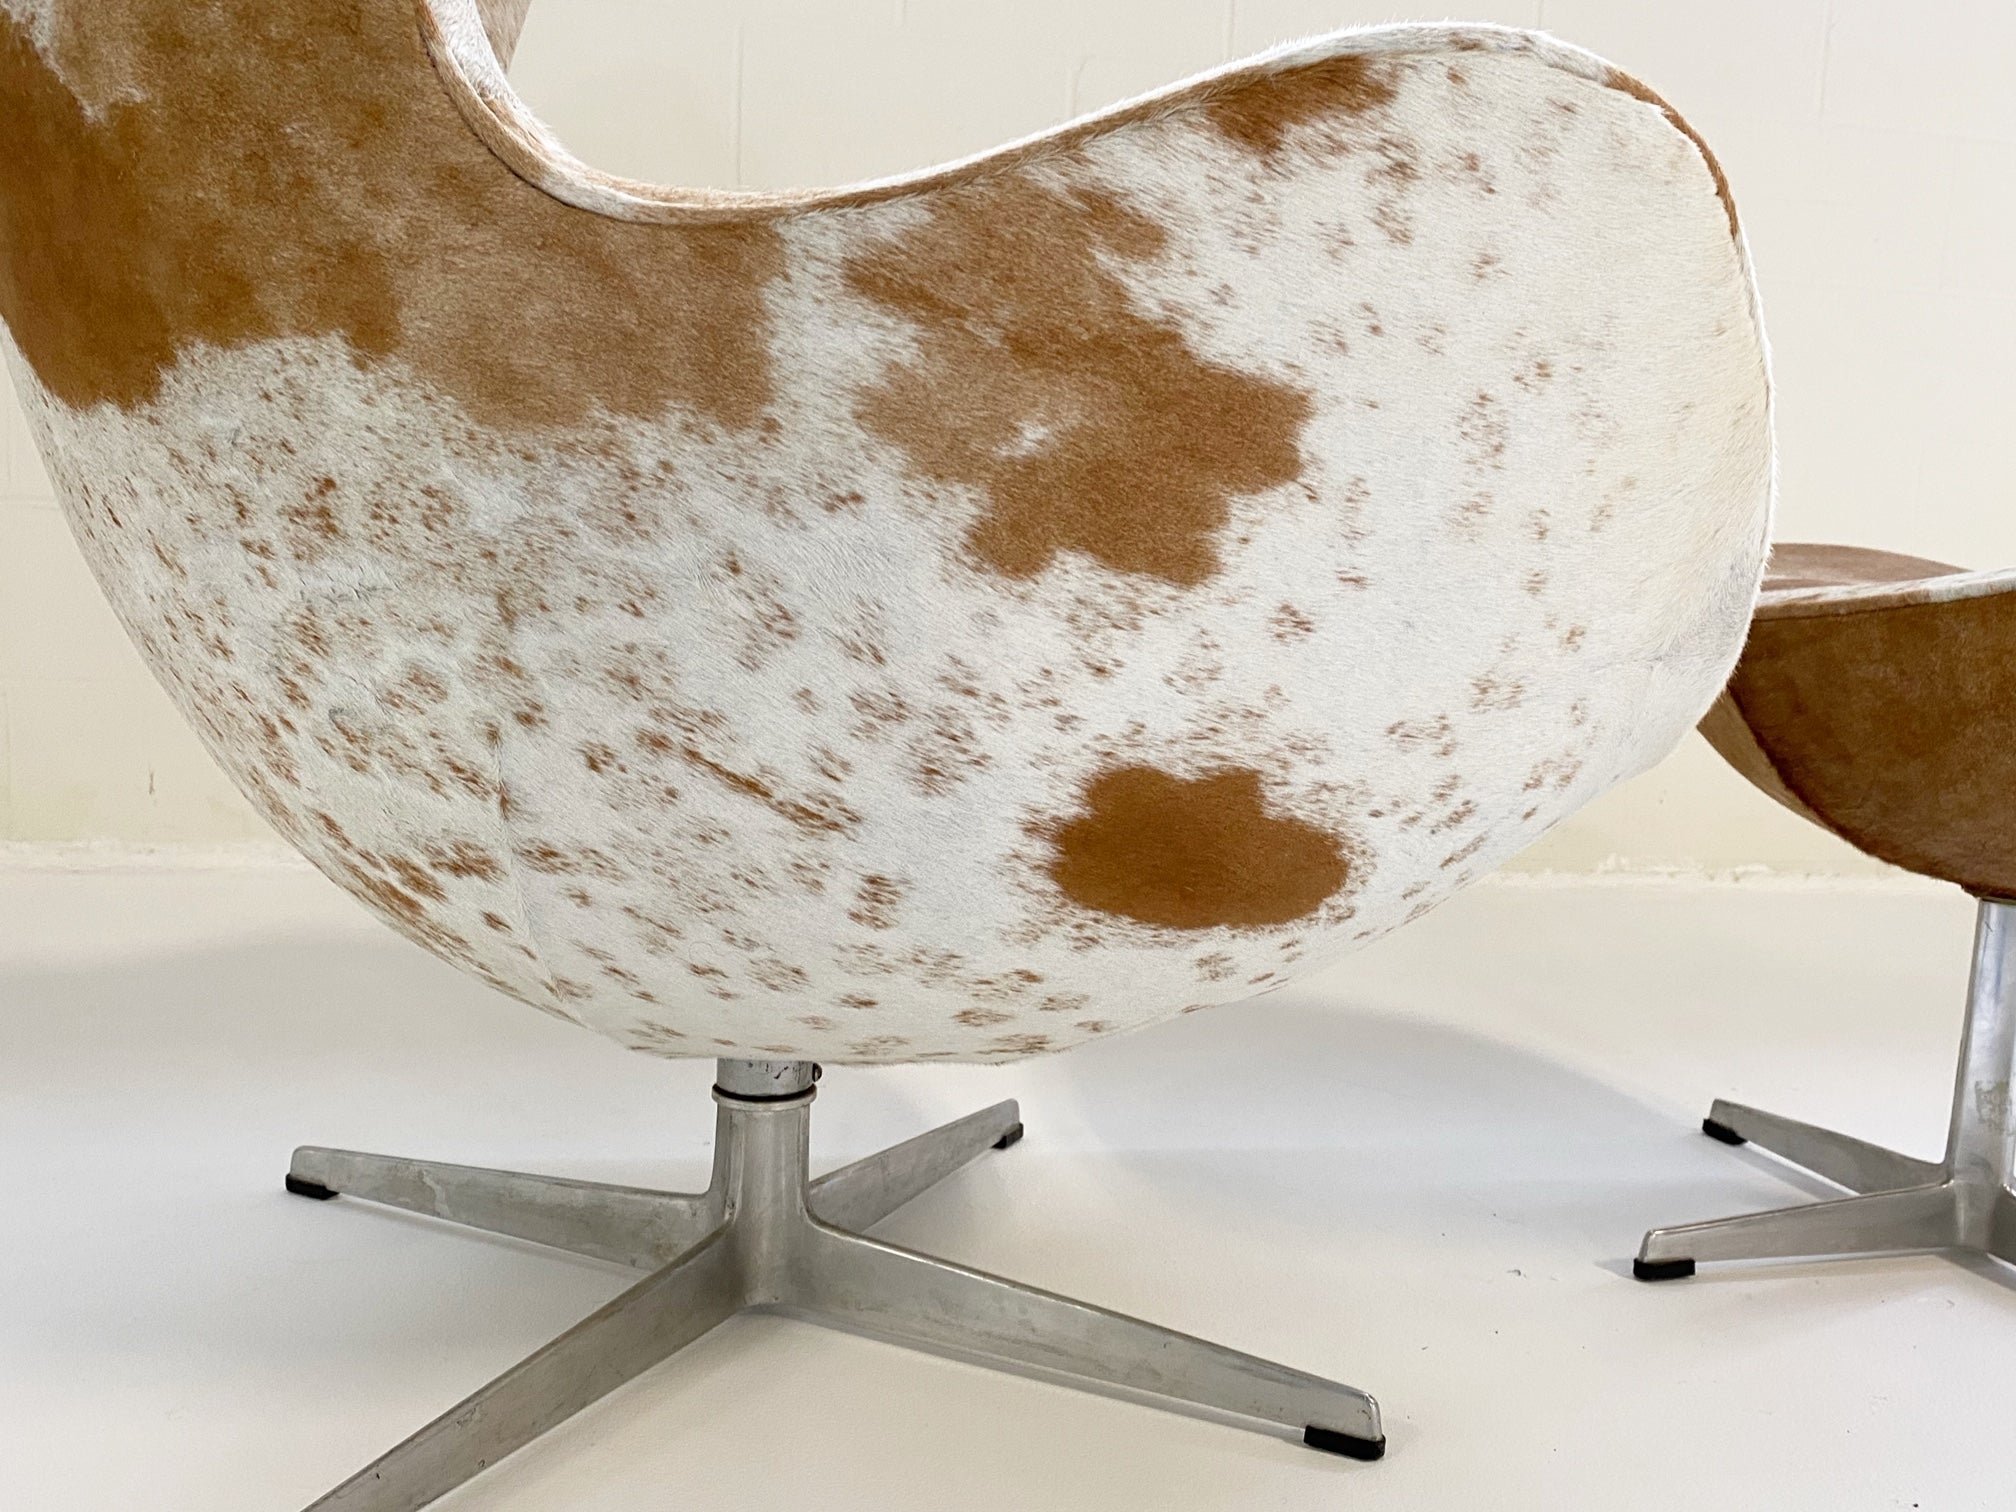 Egg Chair and Ottoman in Brazilian Cowhide - FORSYTH